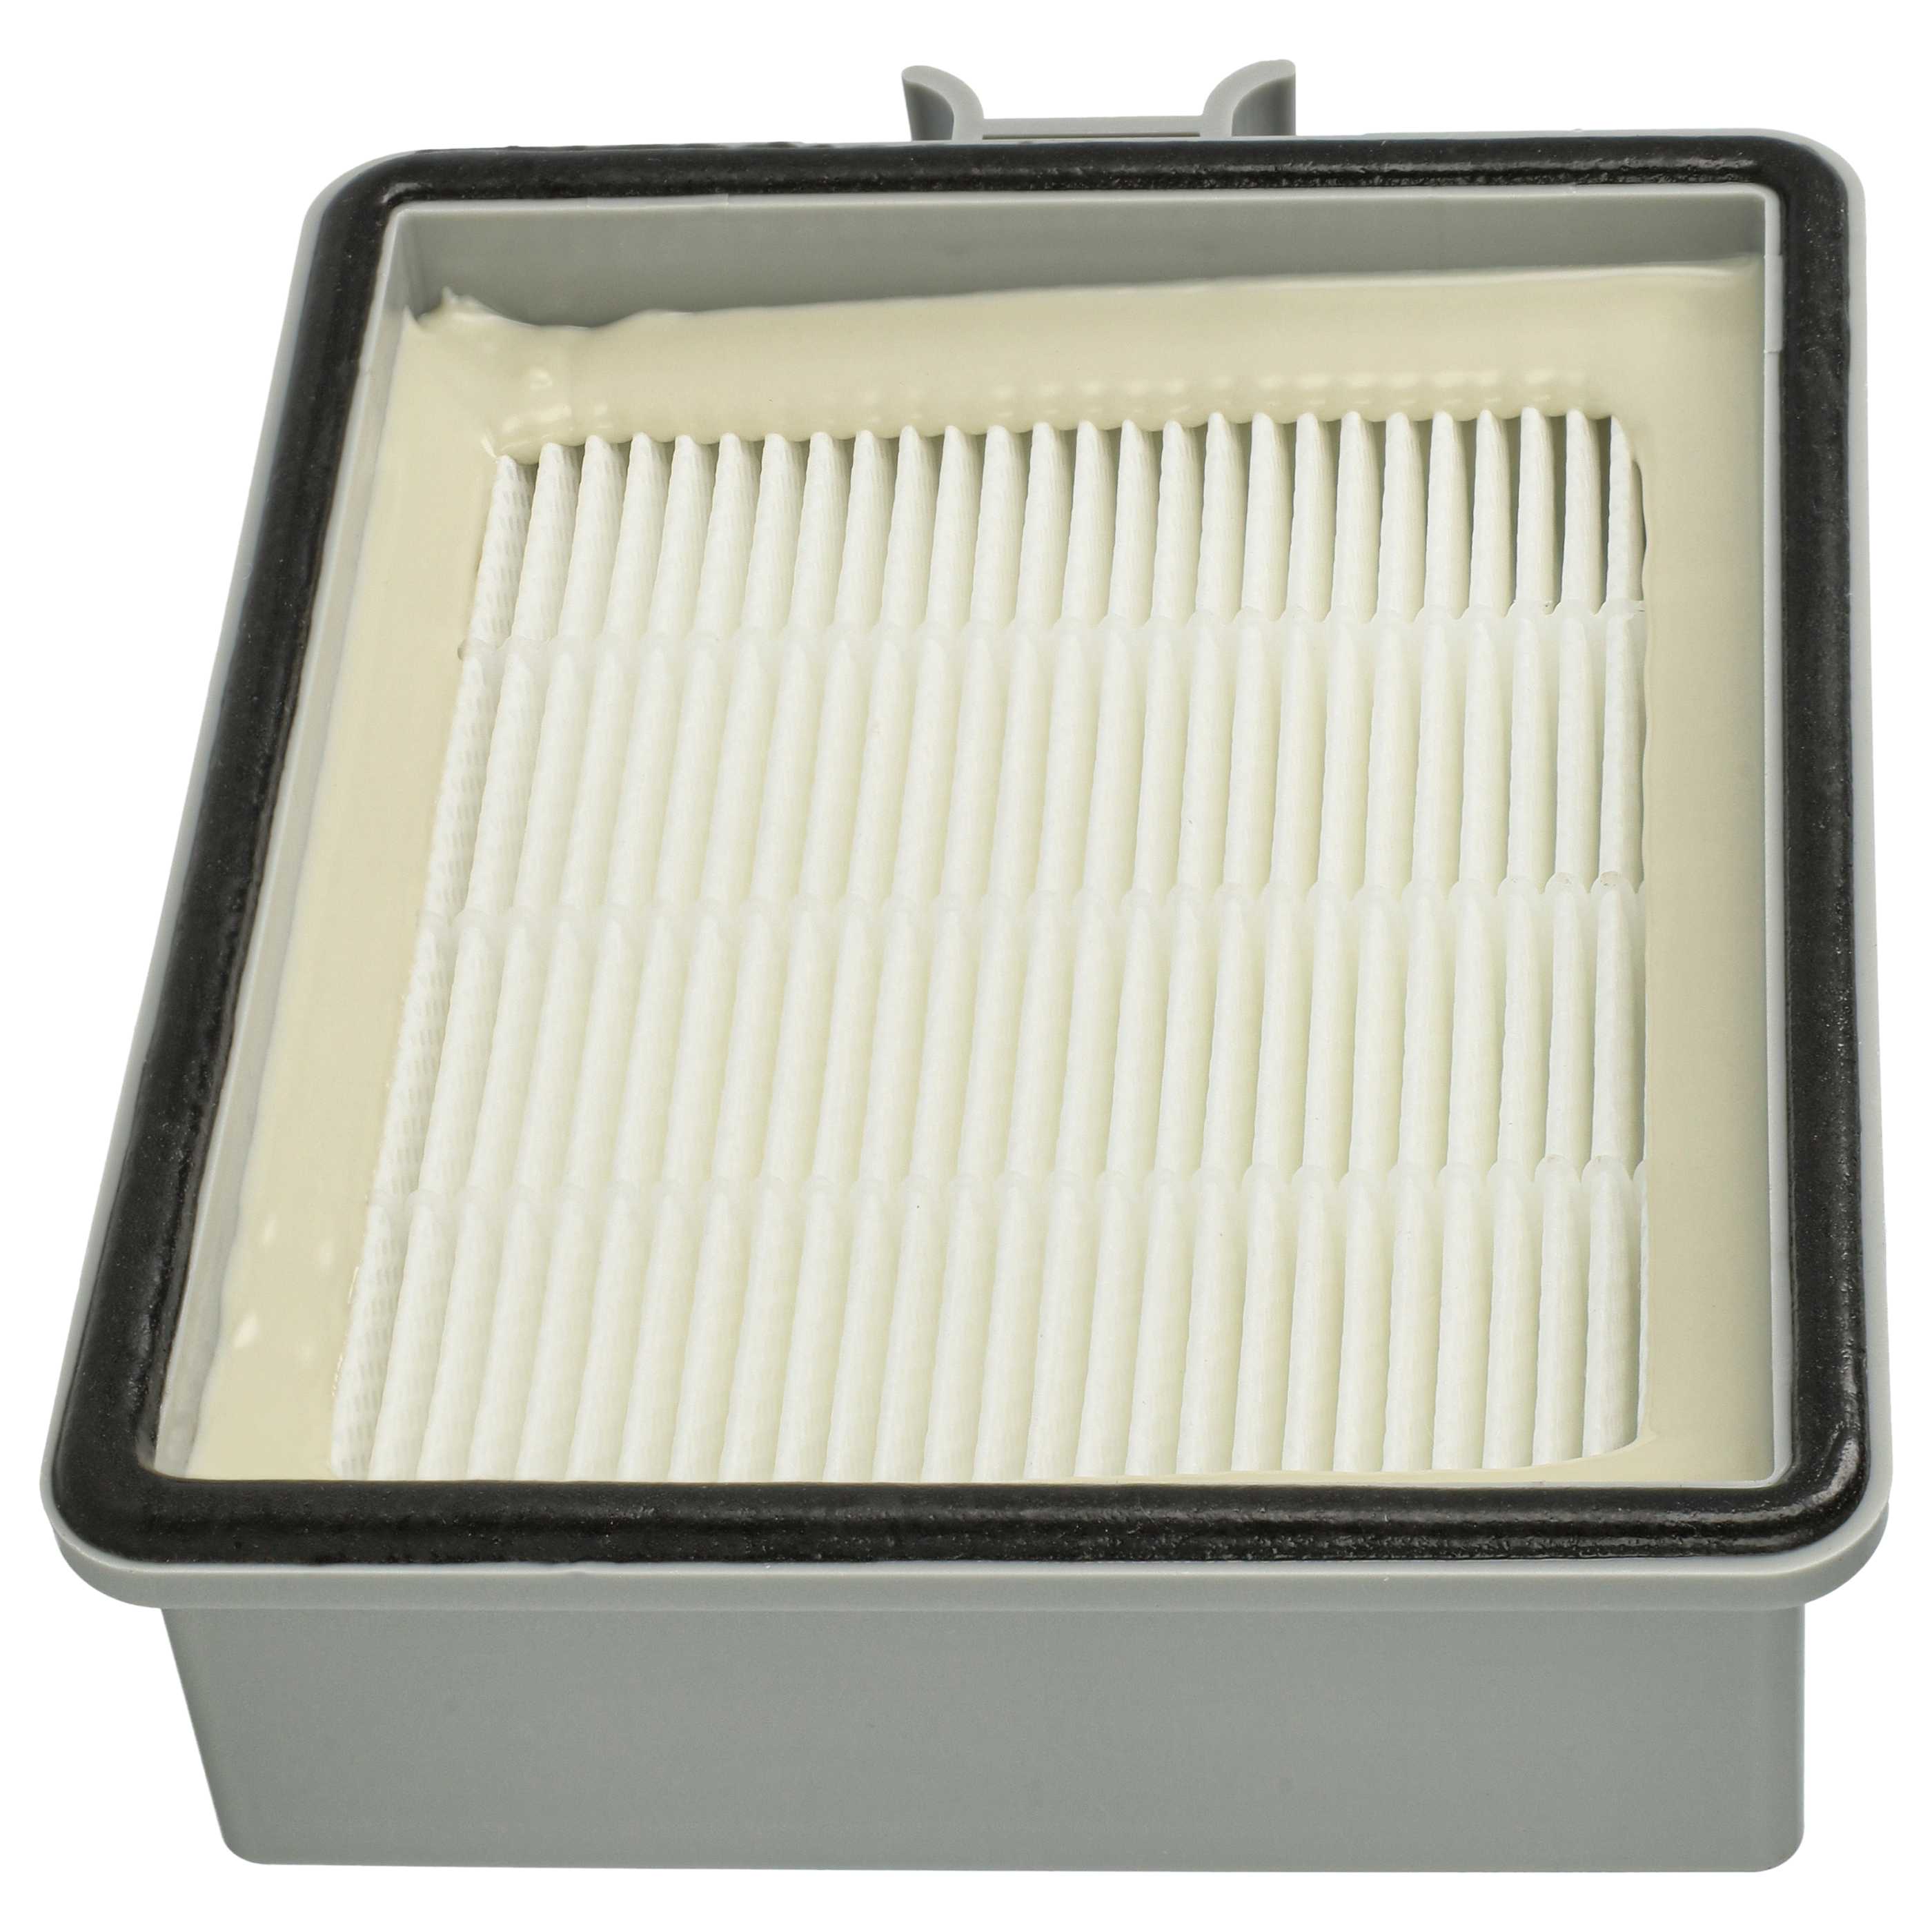 1x post-motor HEPA-filter suitable for Lux Intelligence / S 115 for LuxVacuum Cleaner